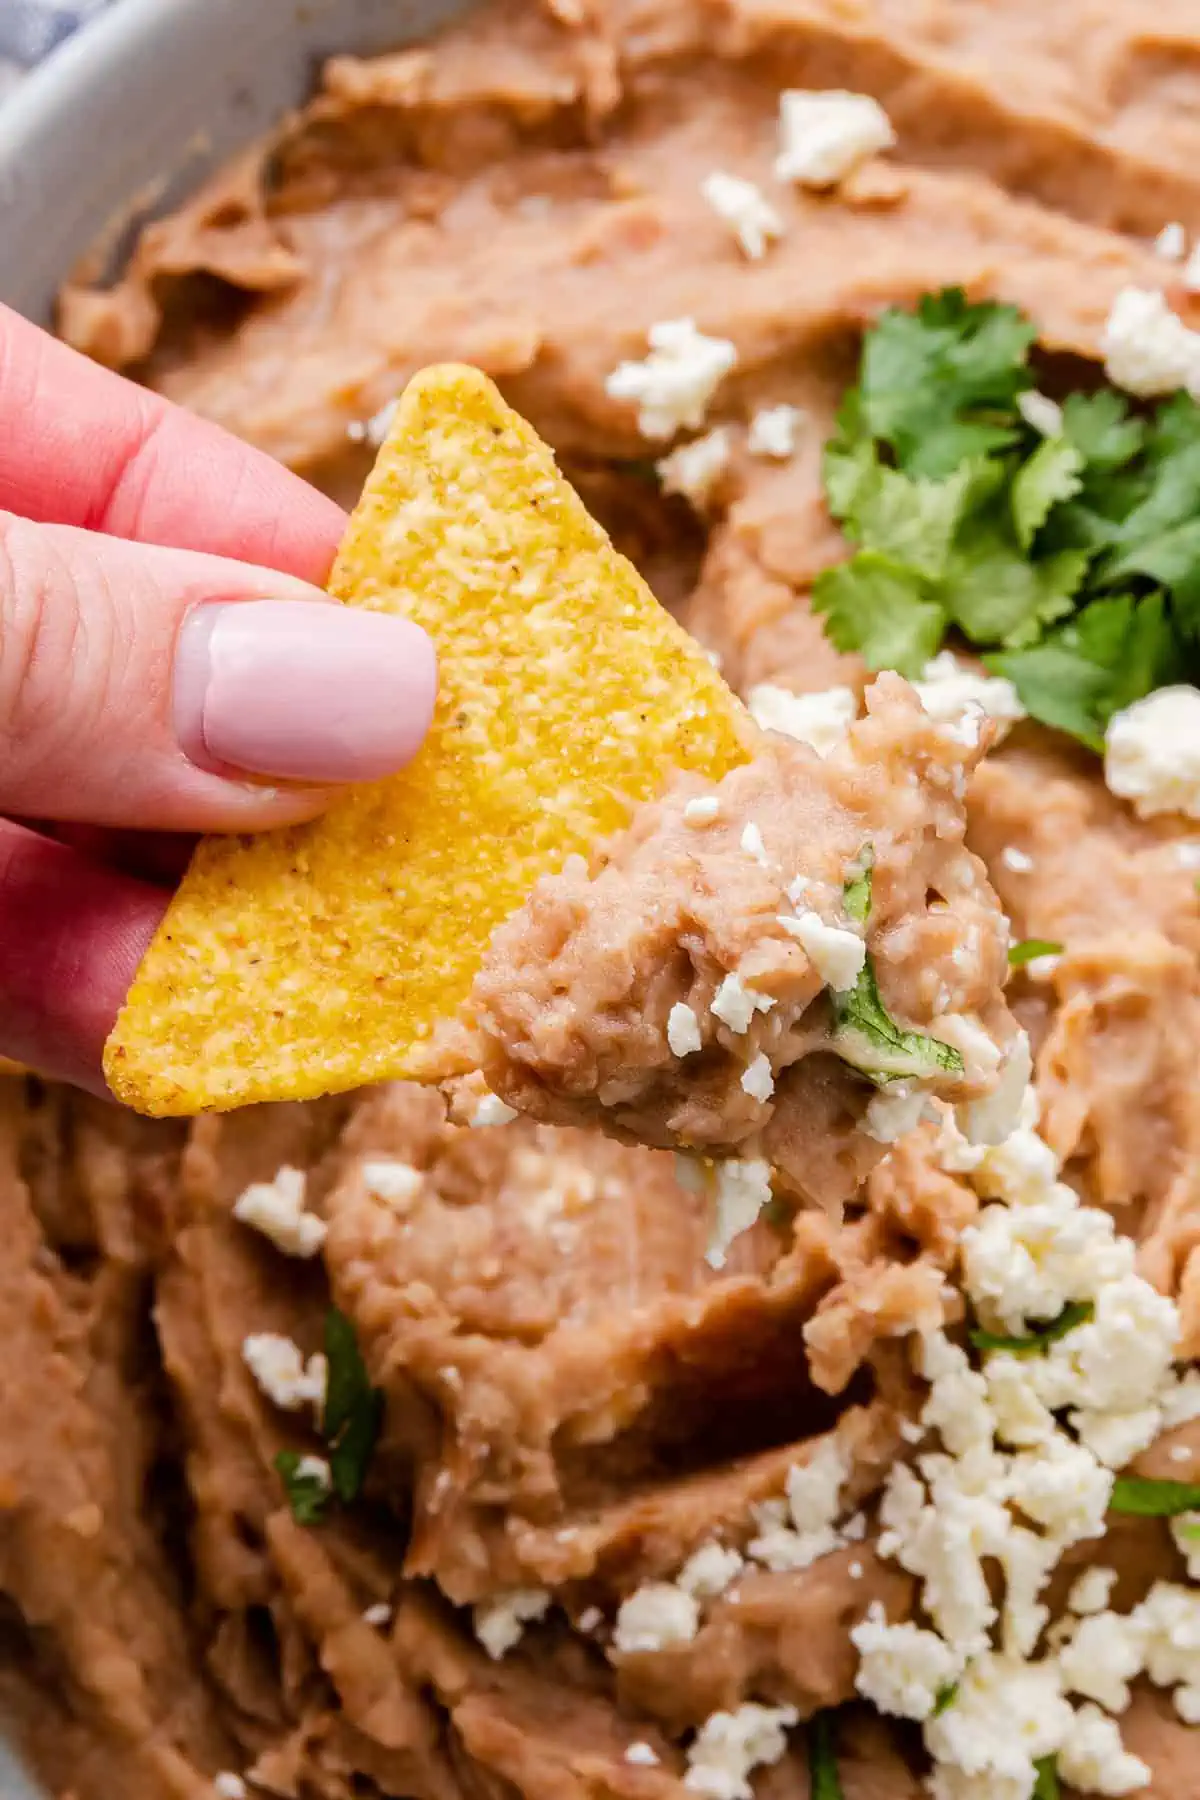 A hand dipping a chip into refried beans topped with cheese and cilantro